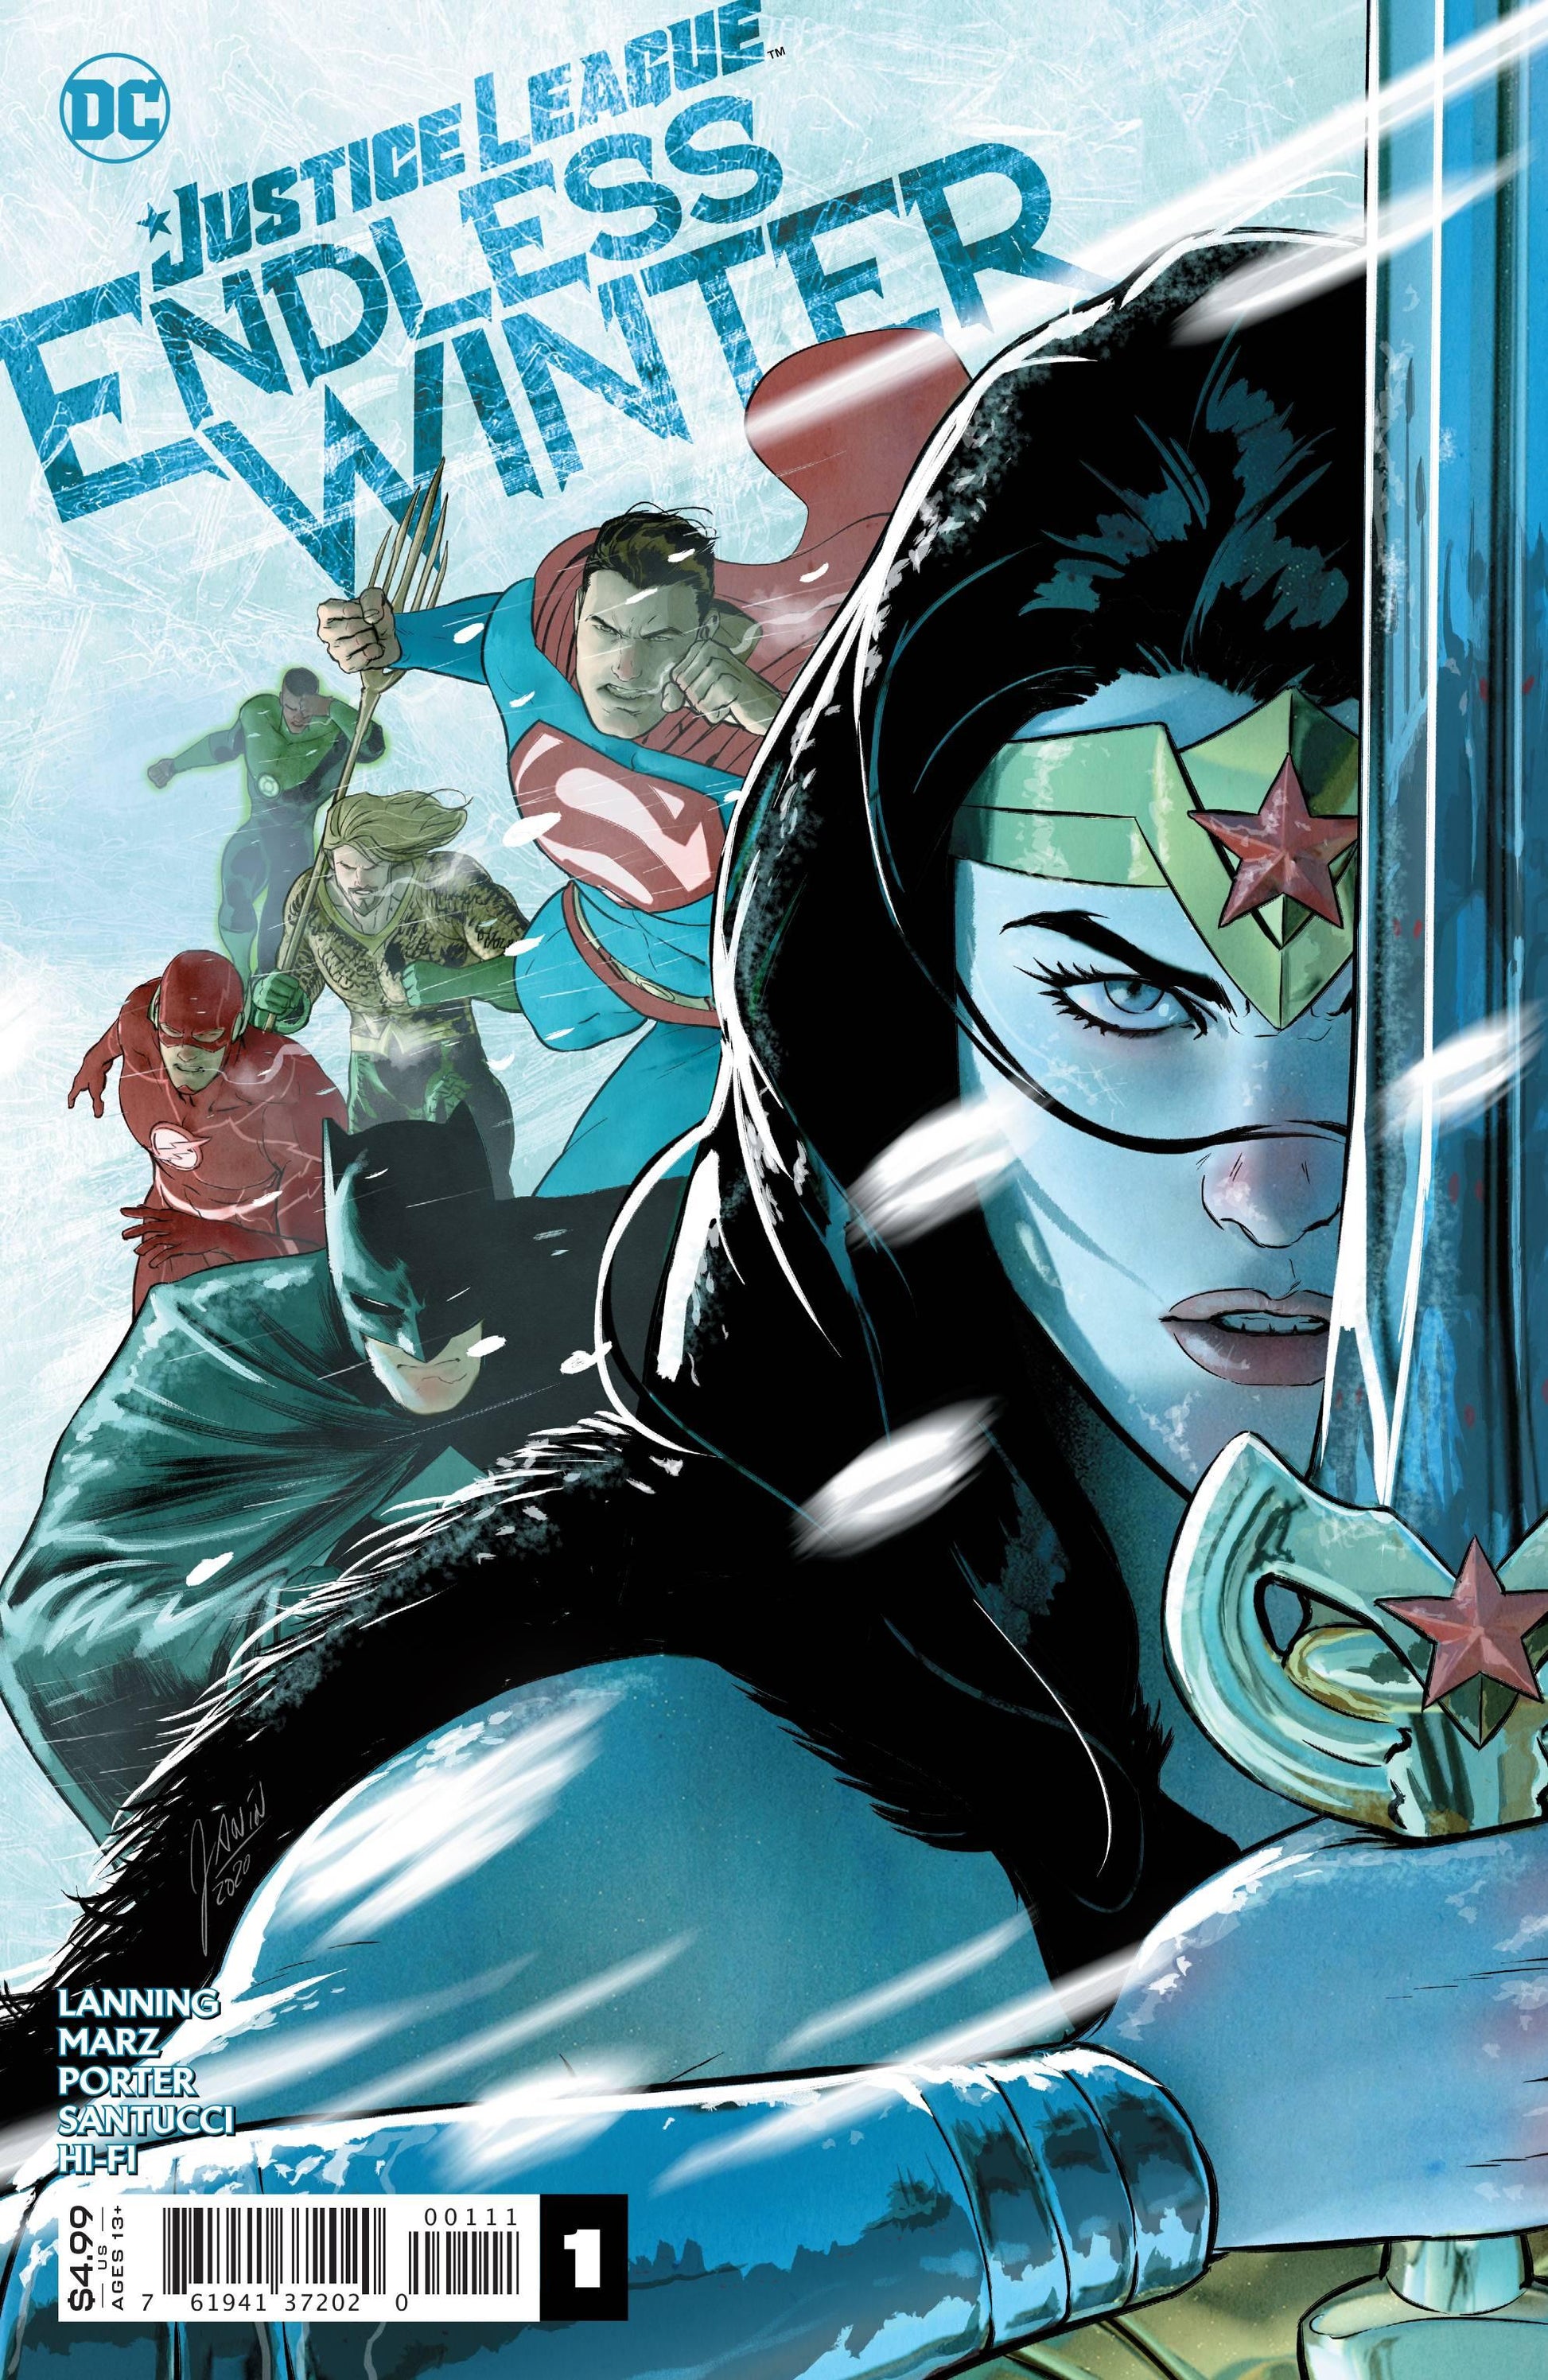 Justice League: Endless Winter #1 - HolyGrail Comix